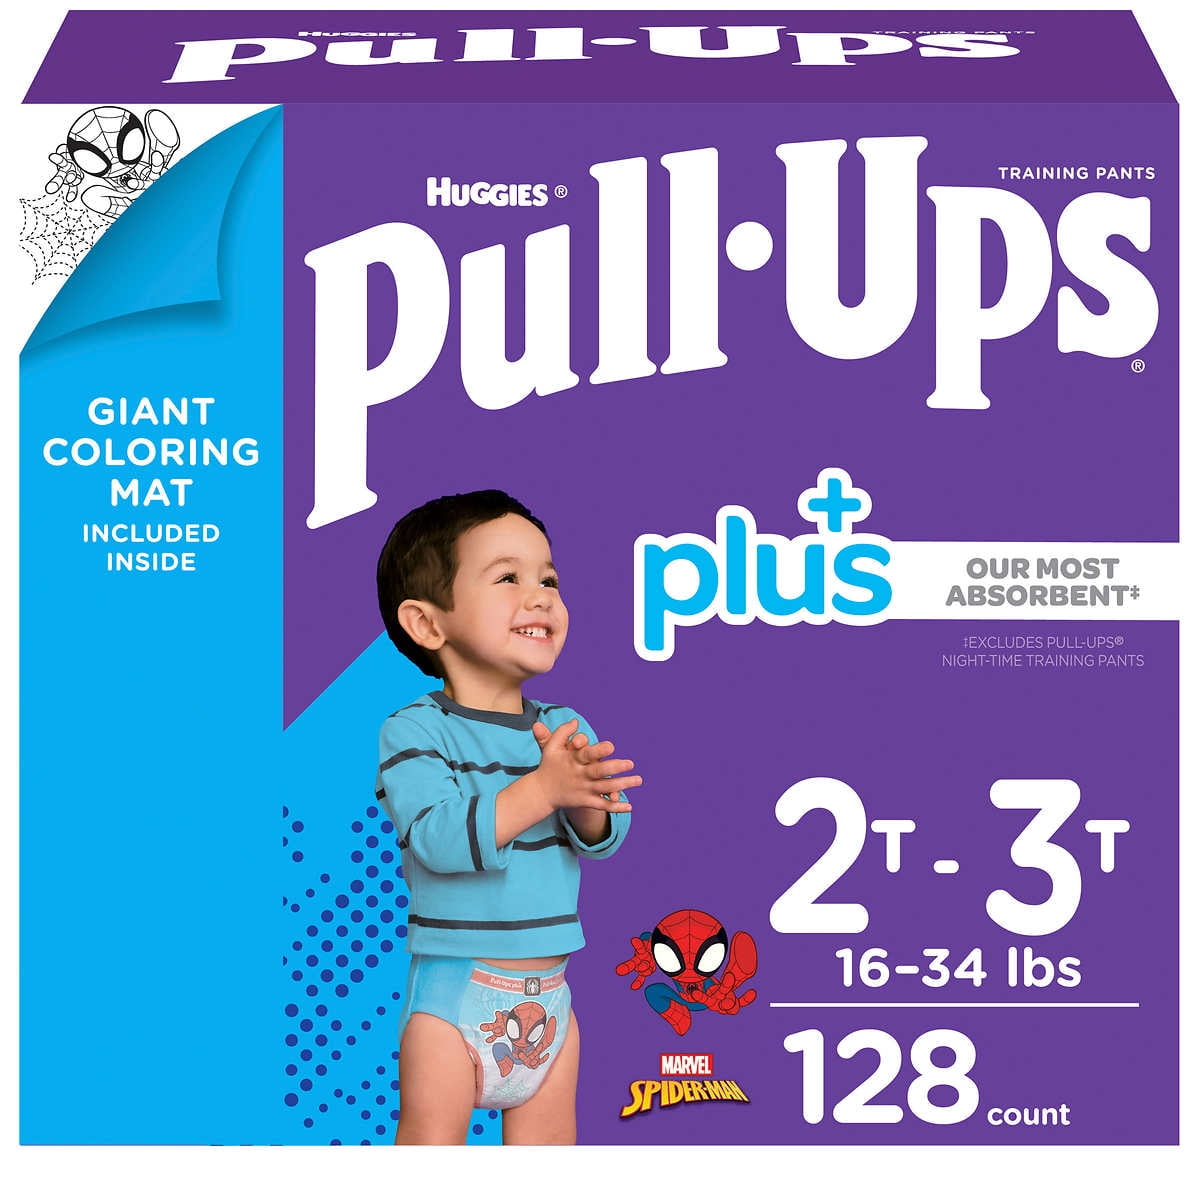 Huggies Pull-Ups Plus Training Pants For Boys One Color, 2T-3T (18